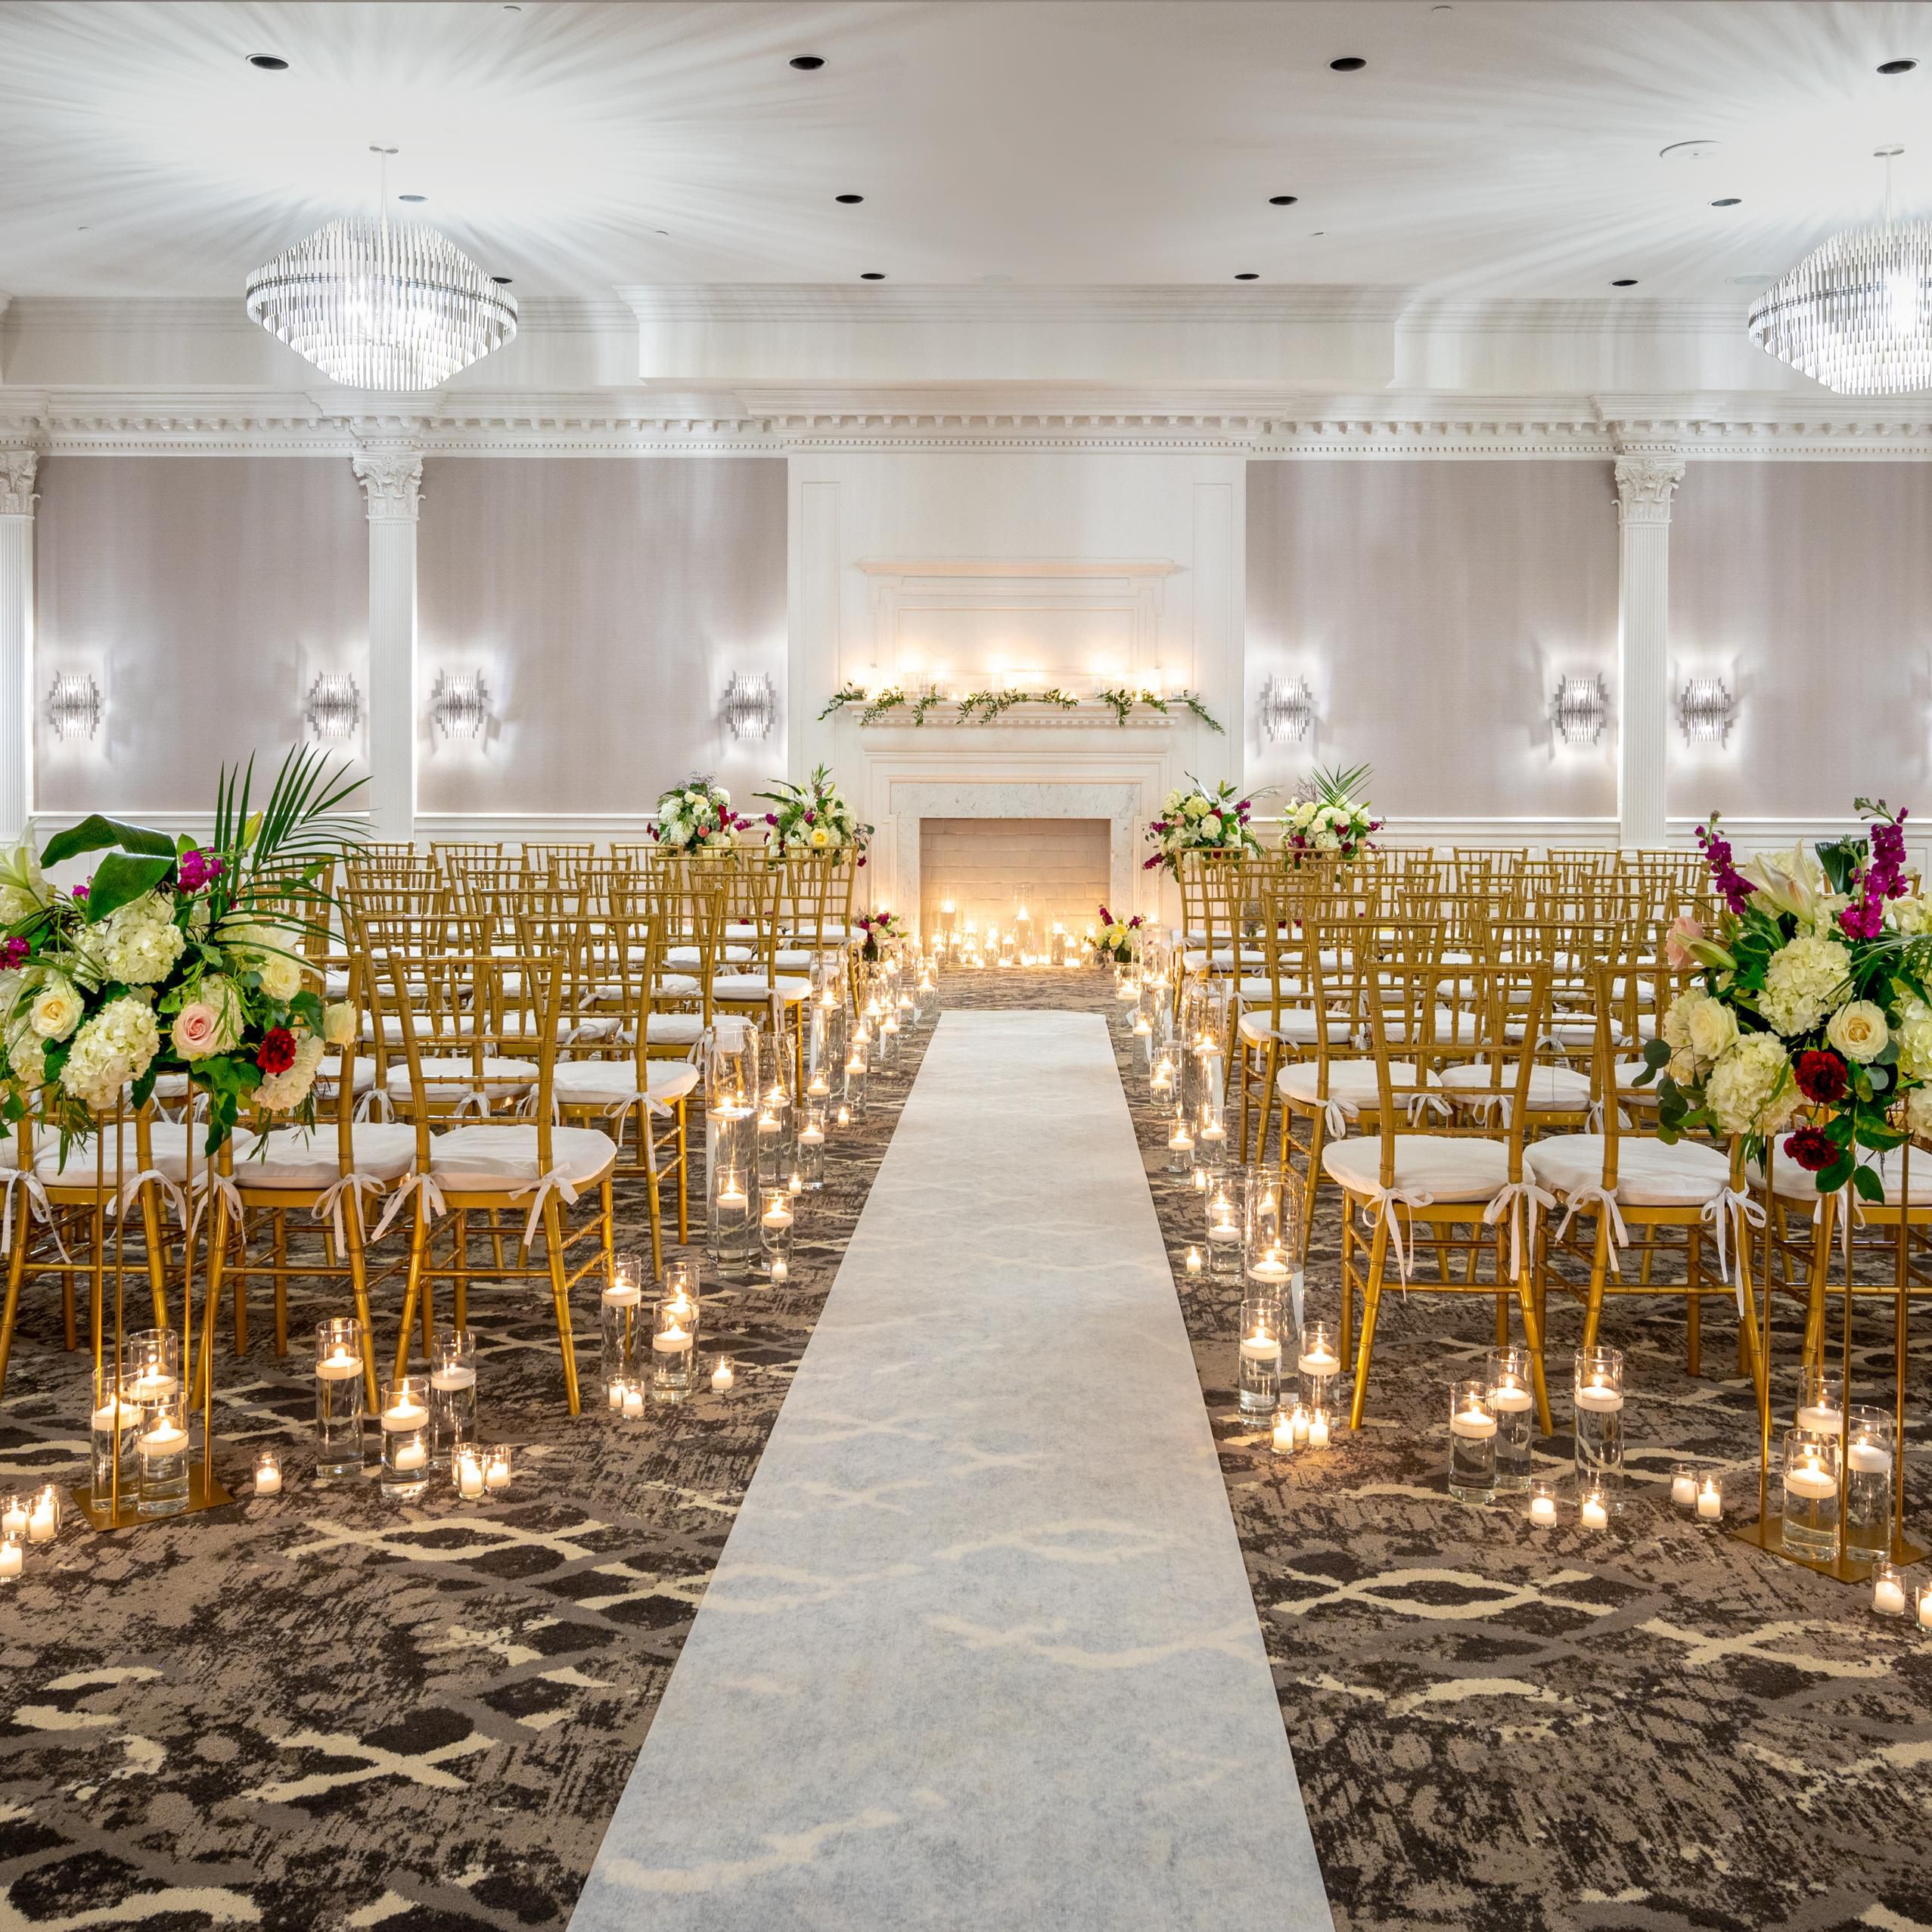 Our beautiful ballrooms are the perfect backdrop for your wedding